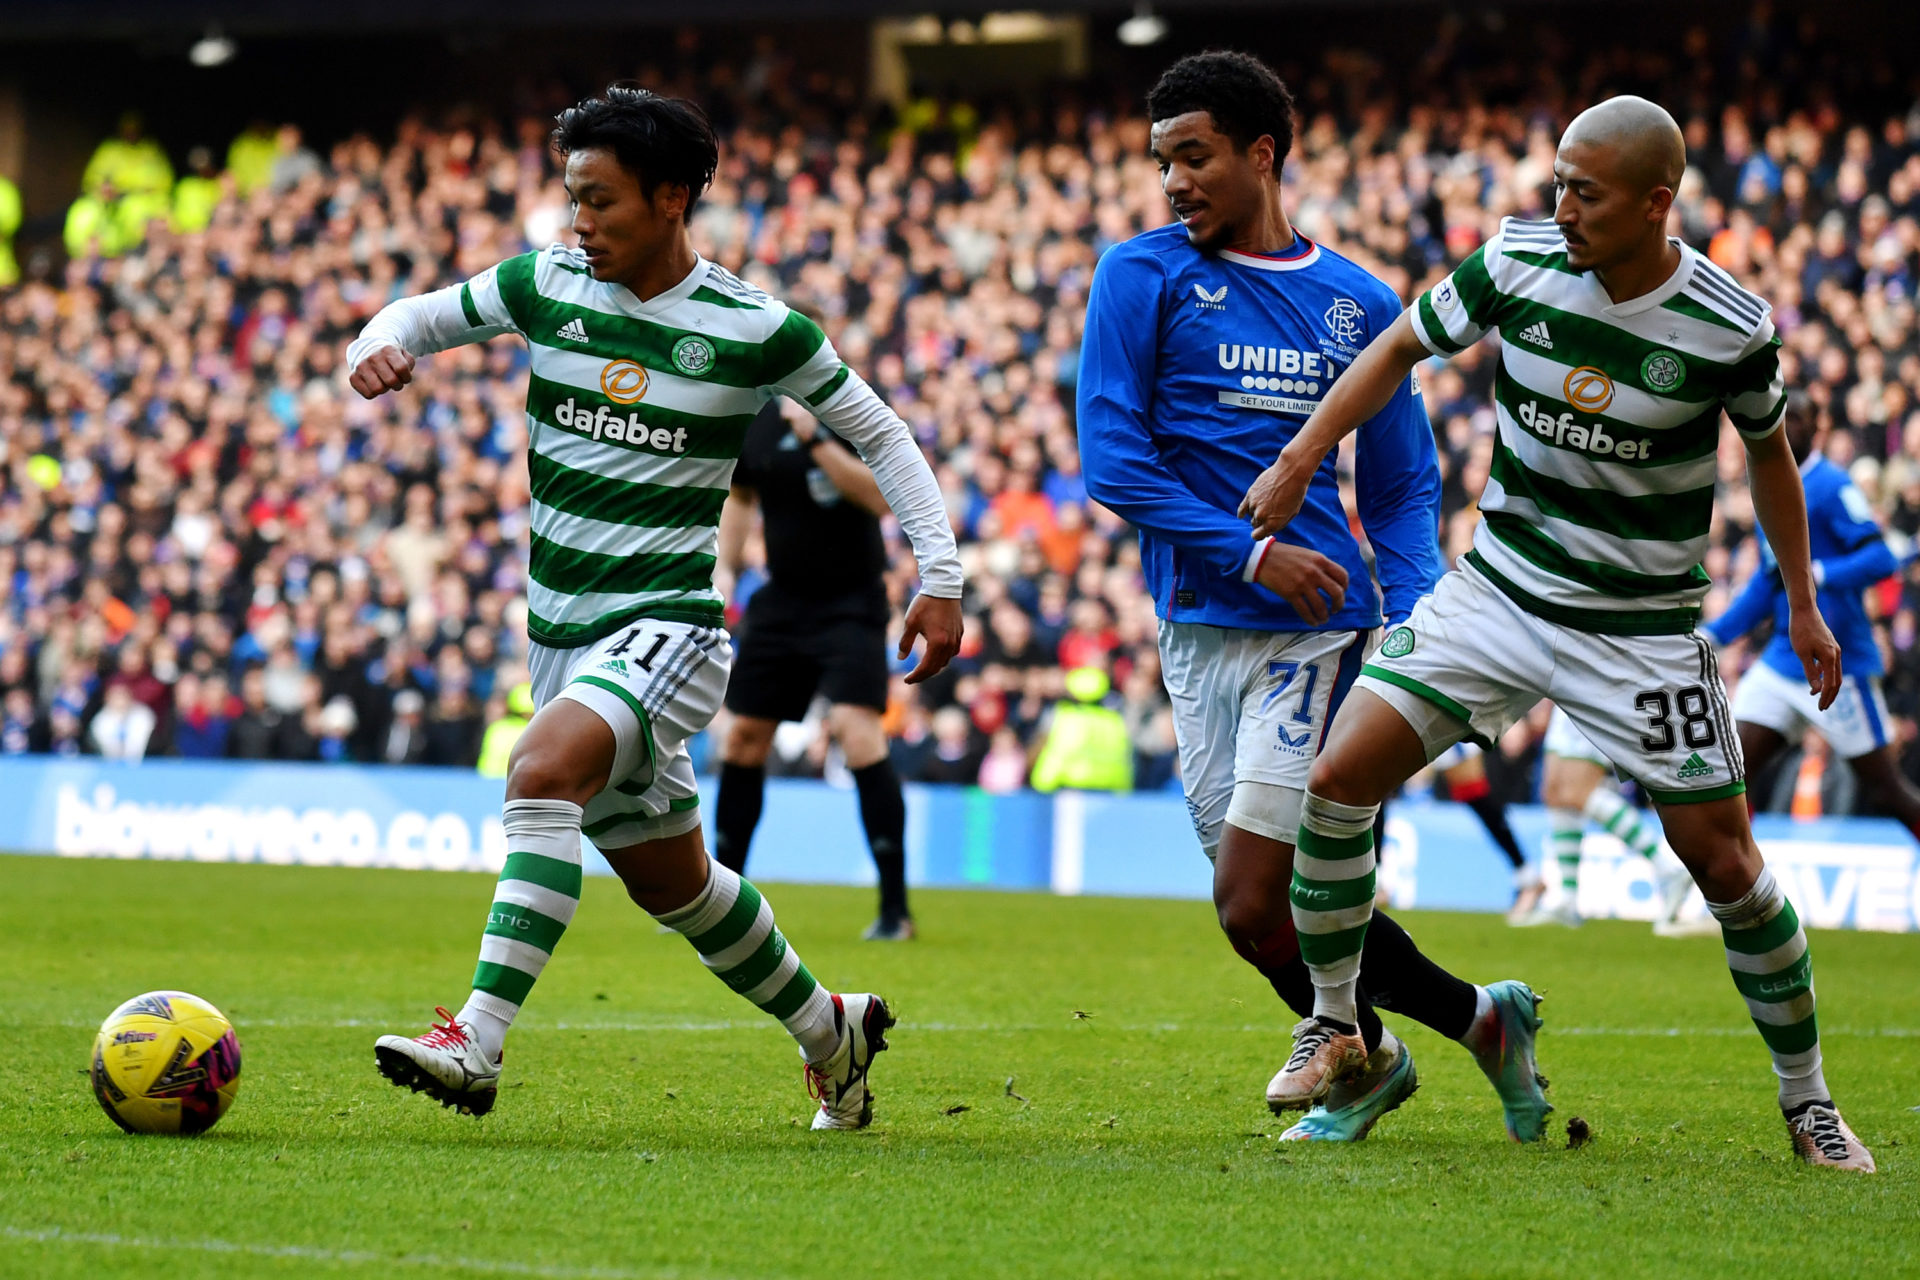 Celtic have won two of their three games against Rangers this season